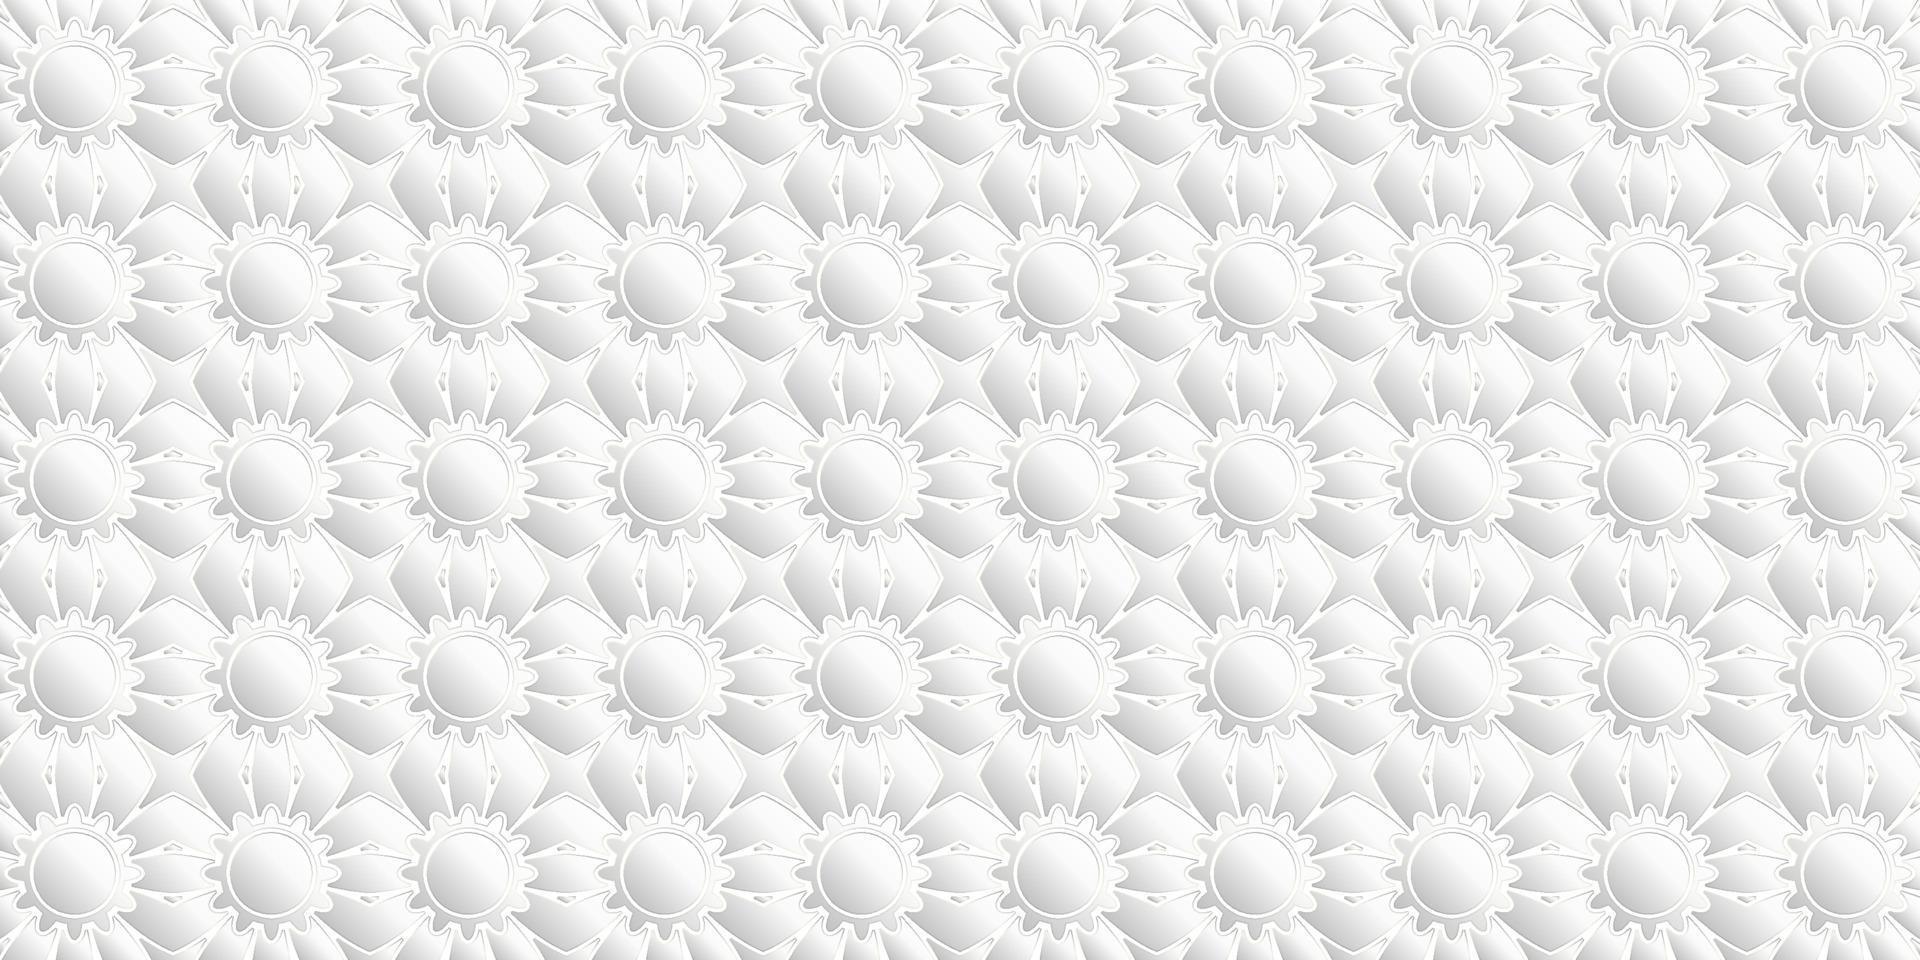 Geometric pattern design modern floral white and gray background vector